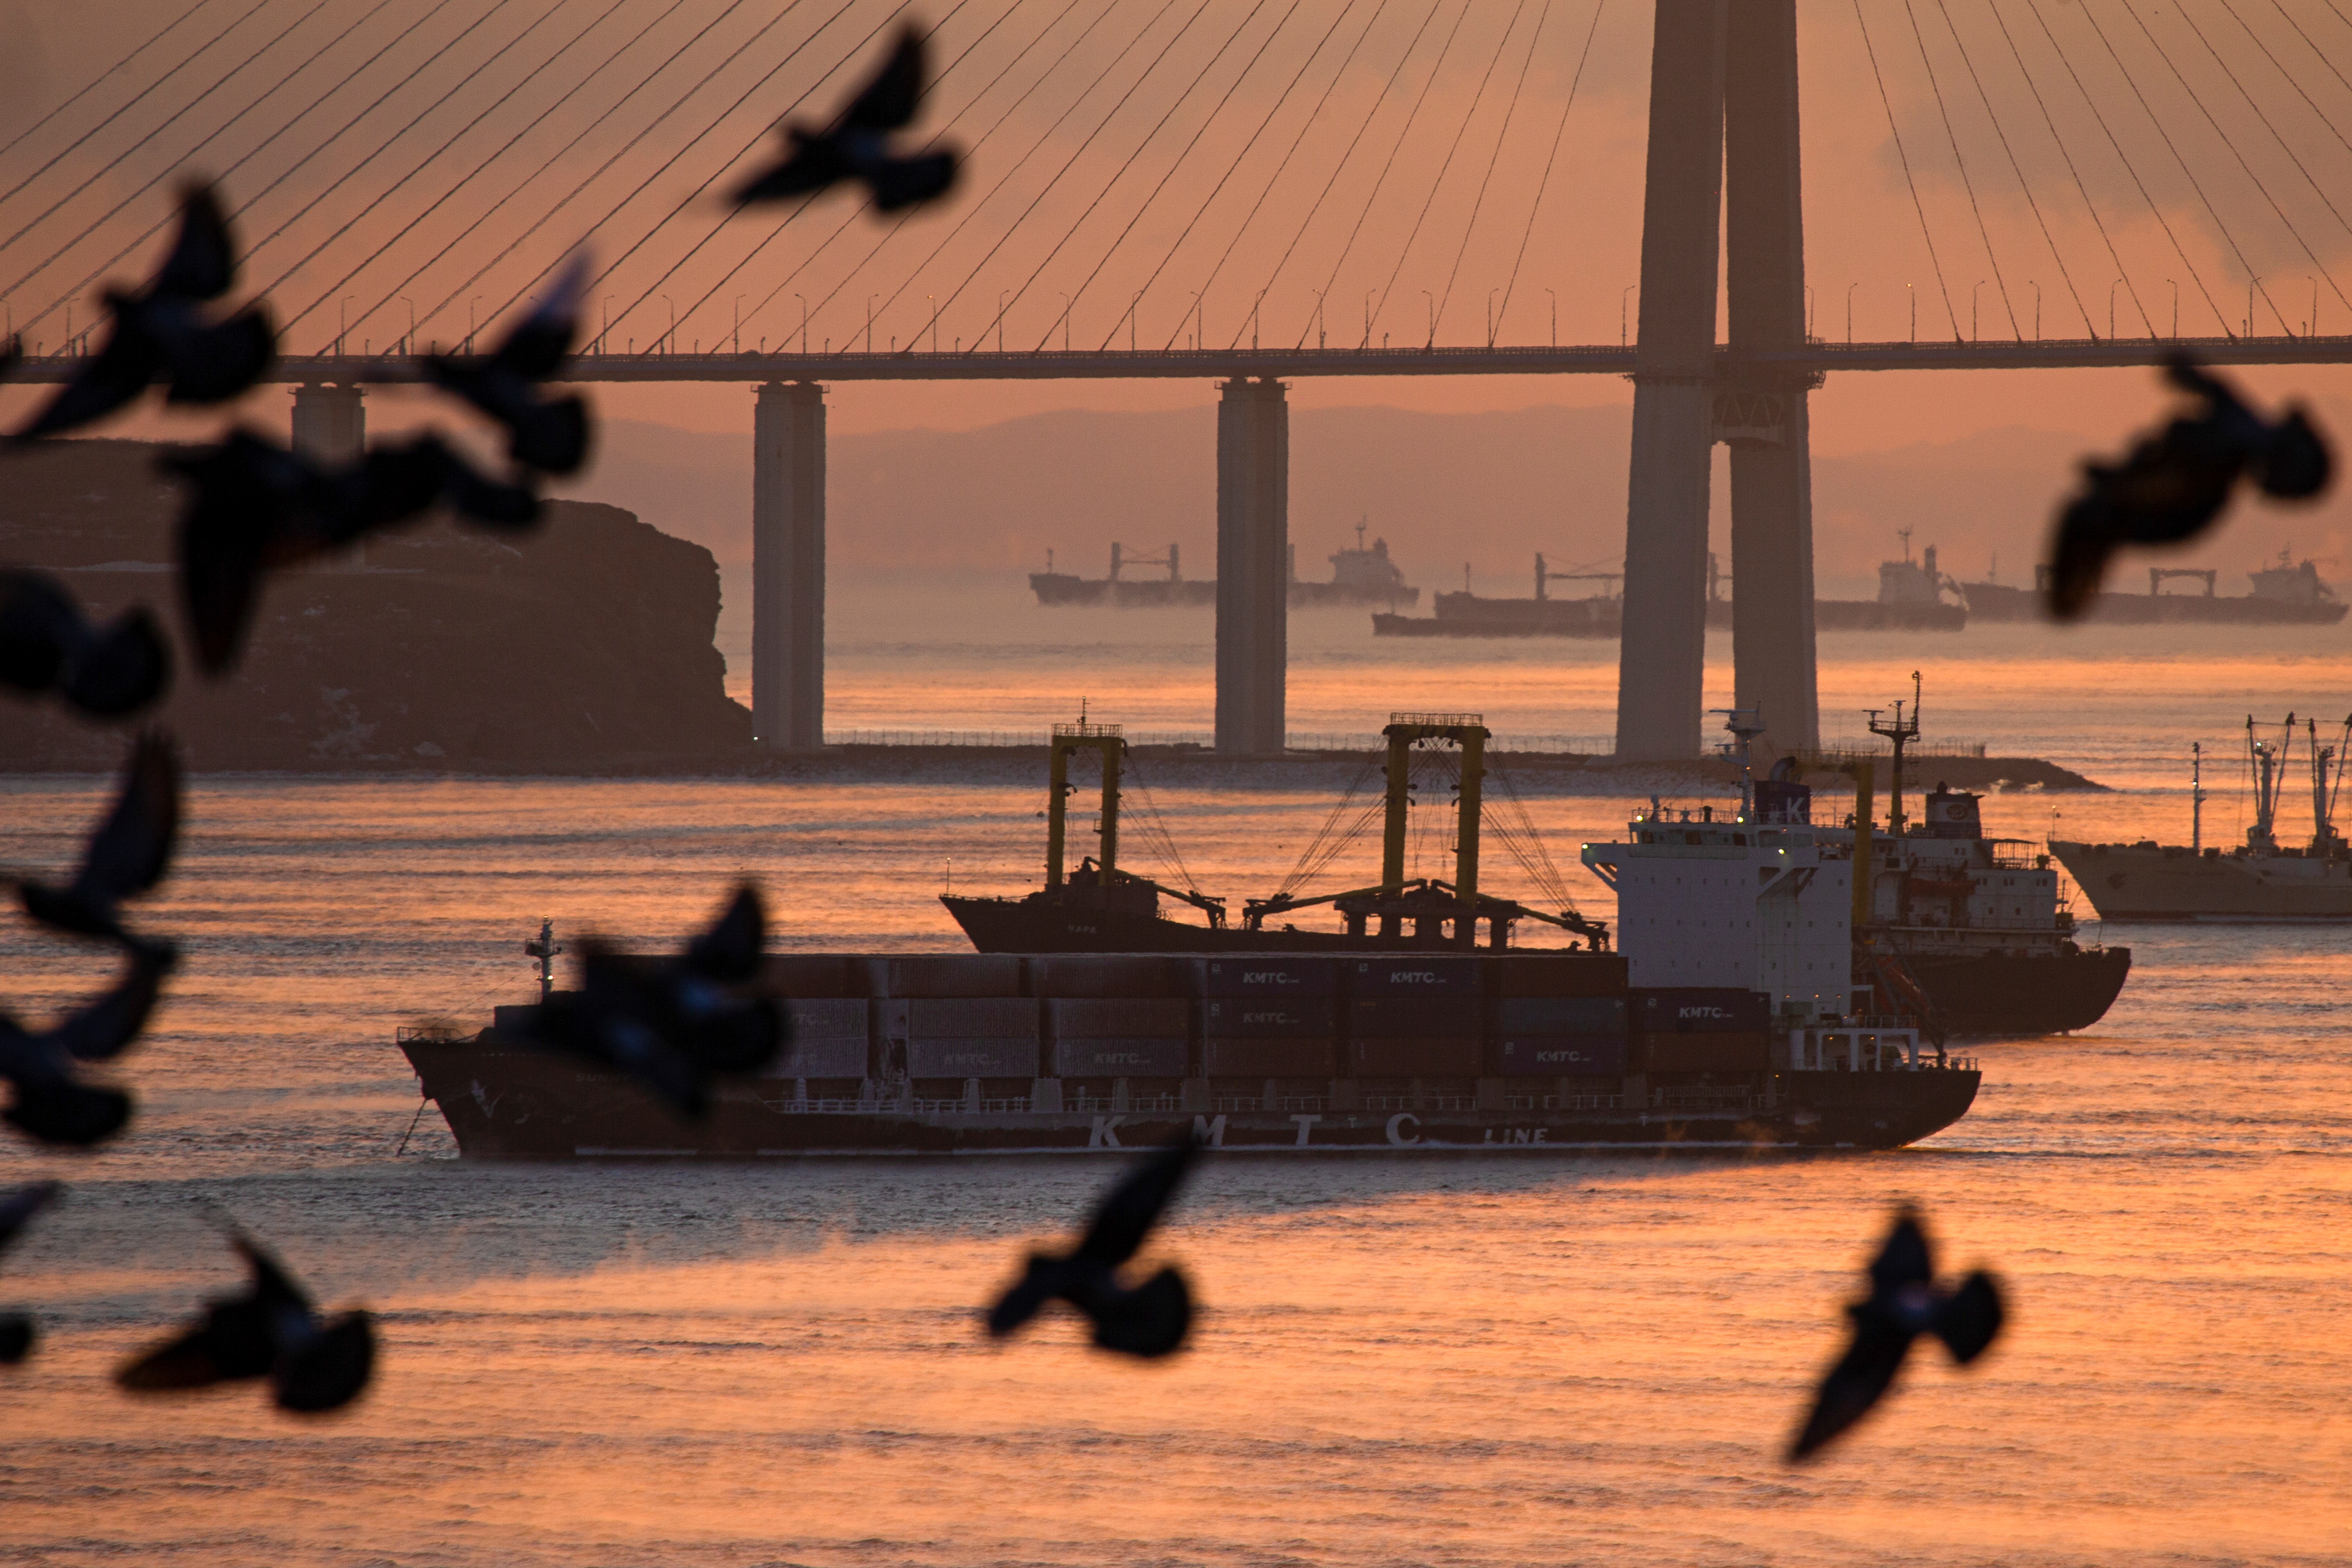 Ships are seen near the Russky Bridge connecting to the Russky Island at a cold day in far-eastern city of Vladivostok